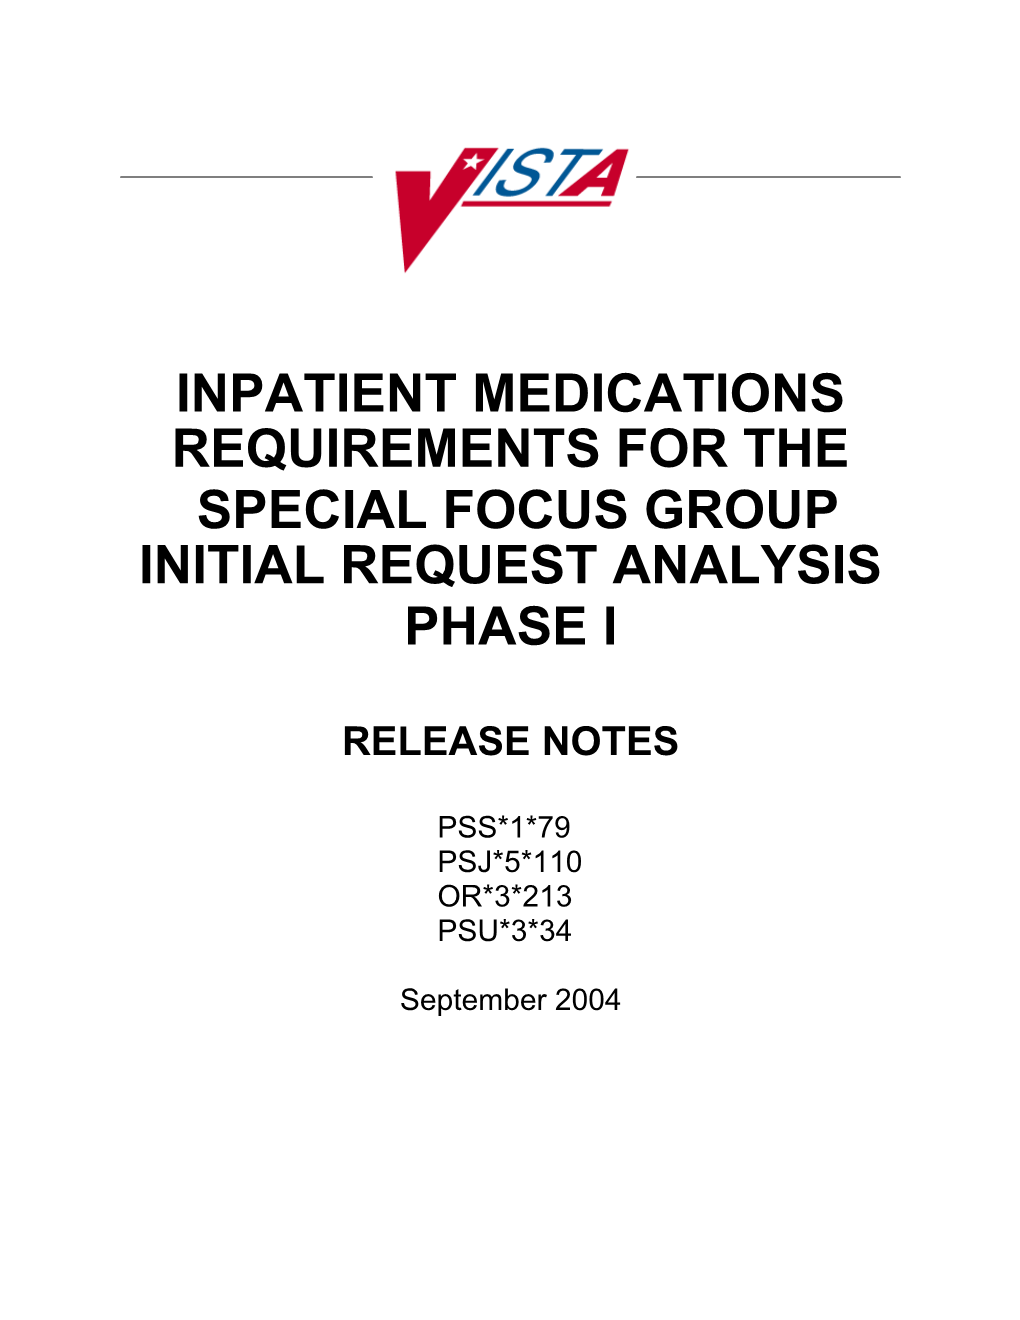 Inpatient Medications Requirements for The